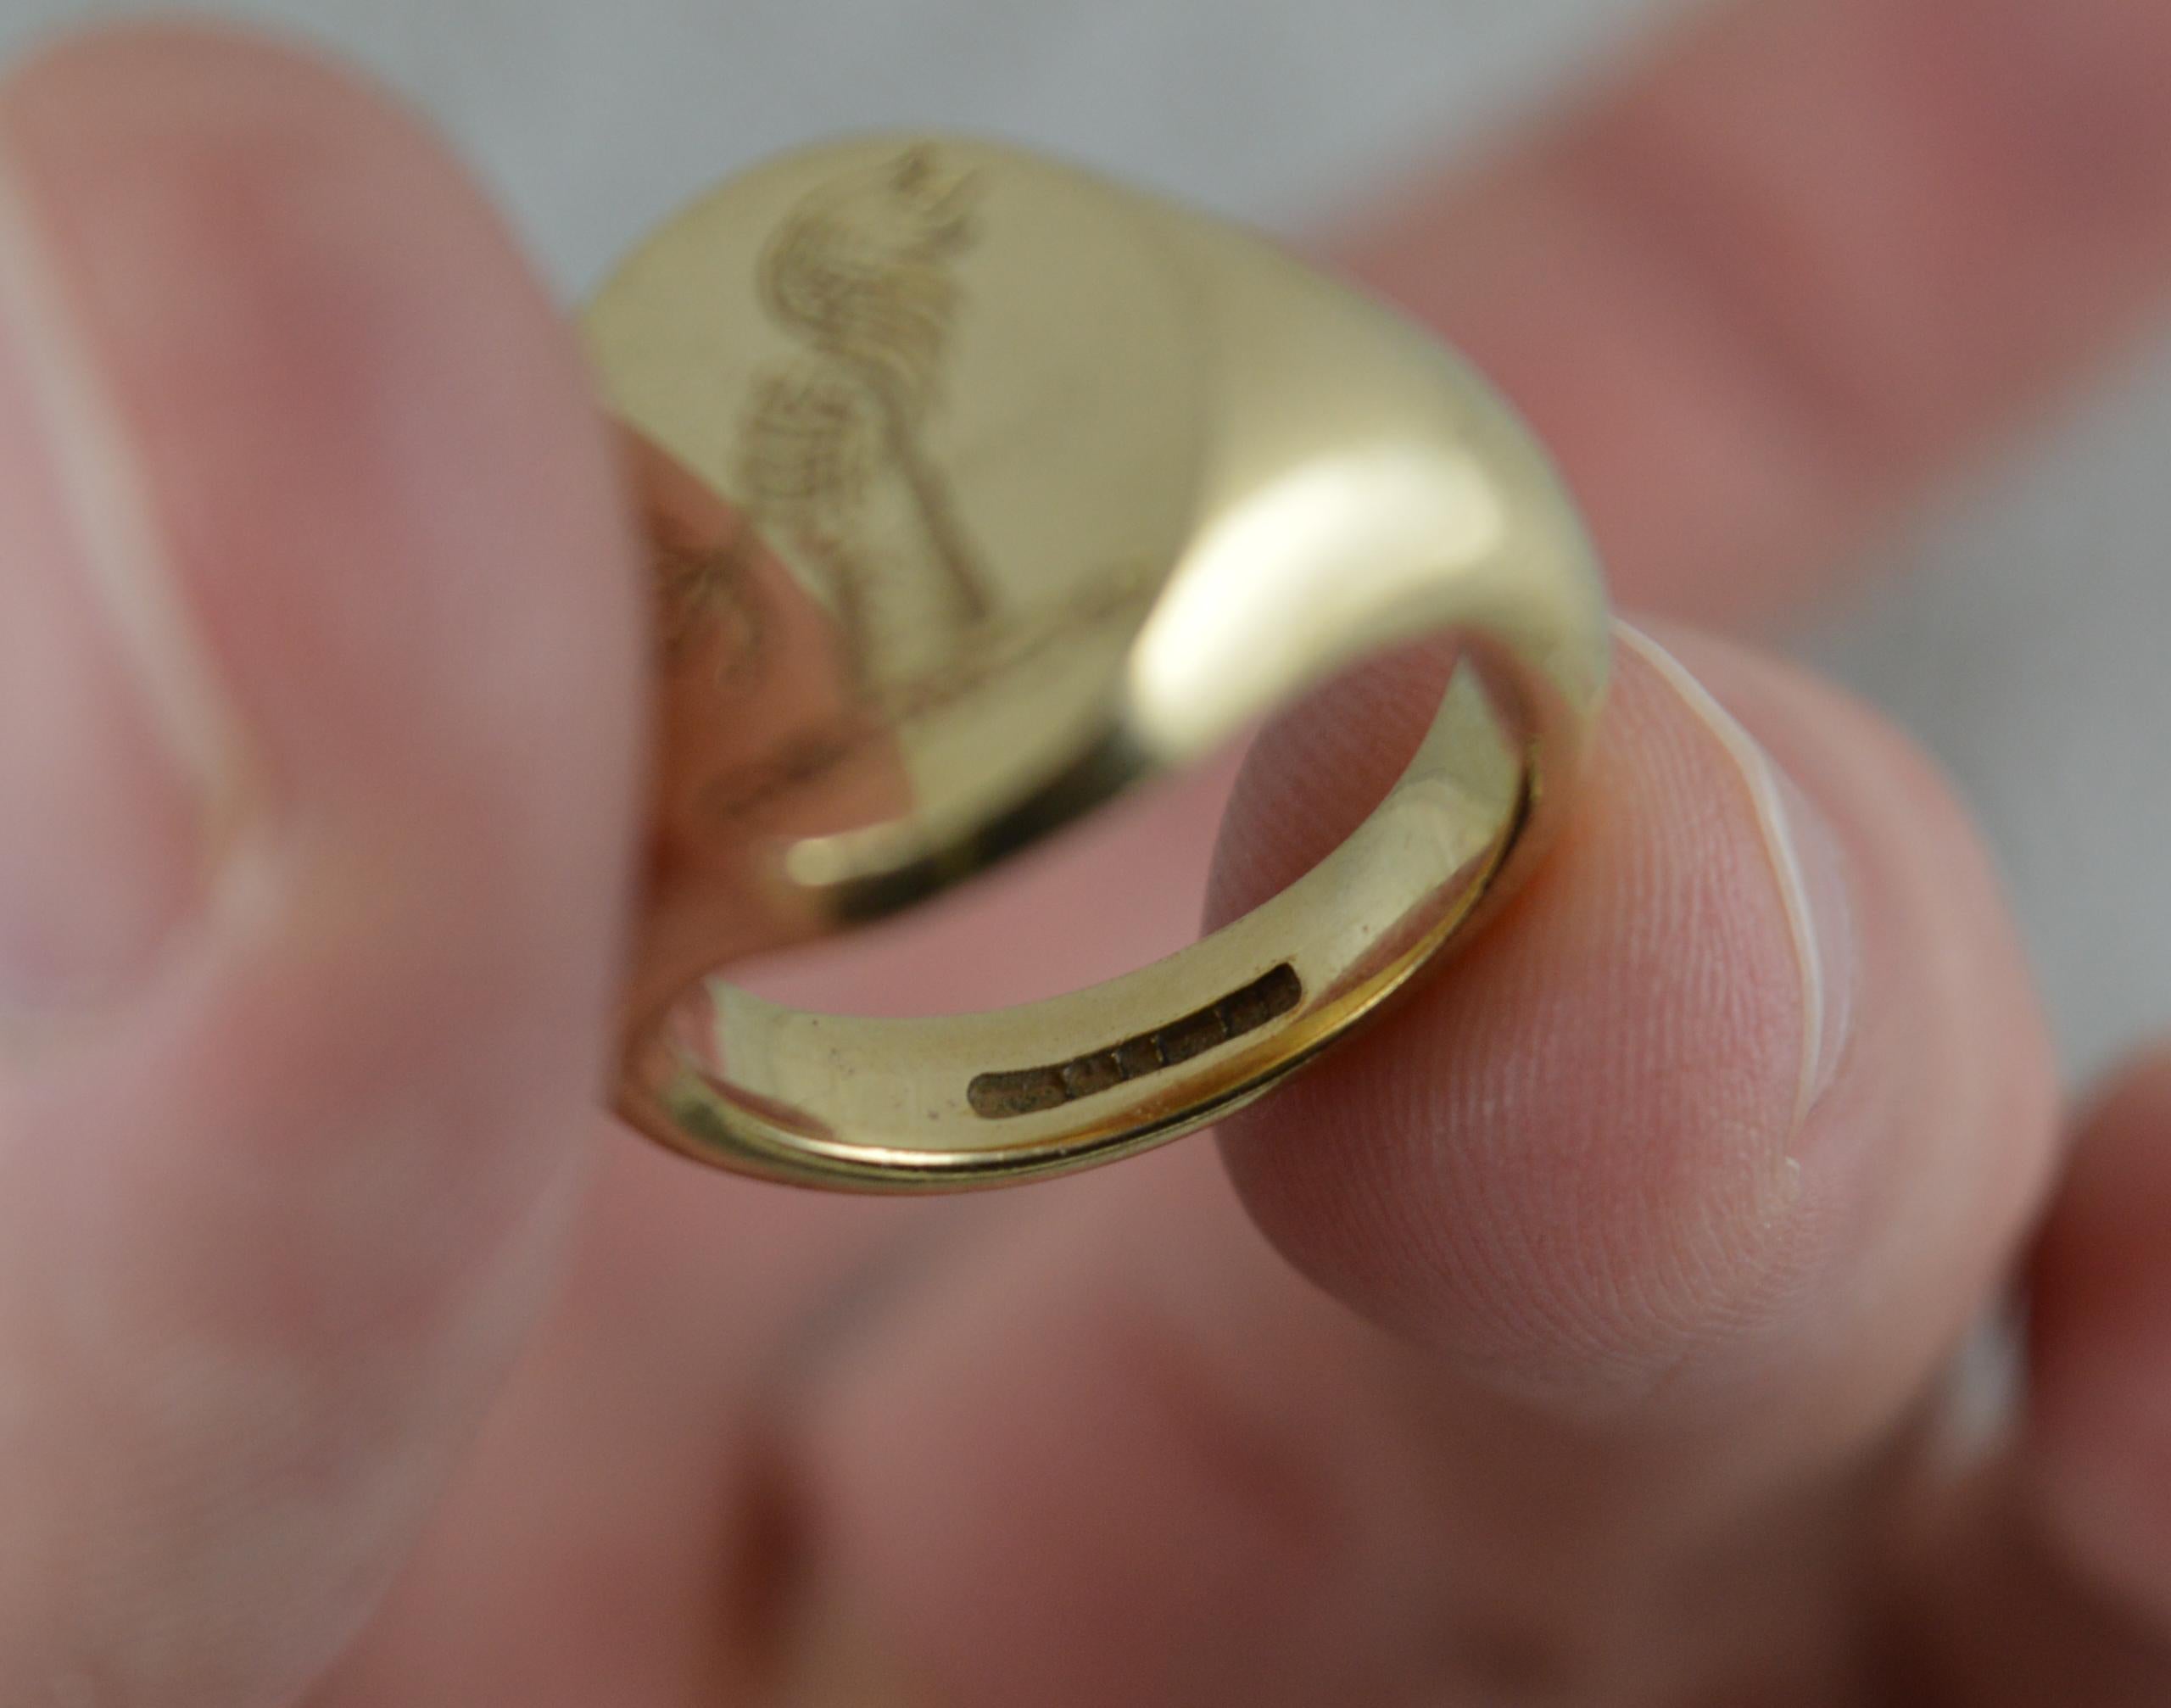 Victorian Quirky 9 Carat Gold Signet Intaglio Ring with Chicken Leg